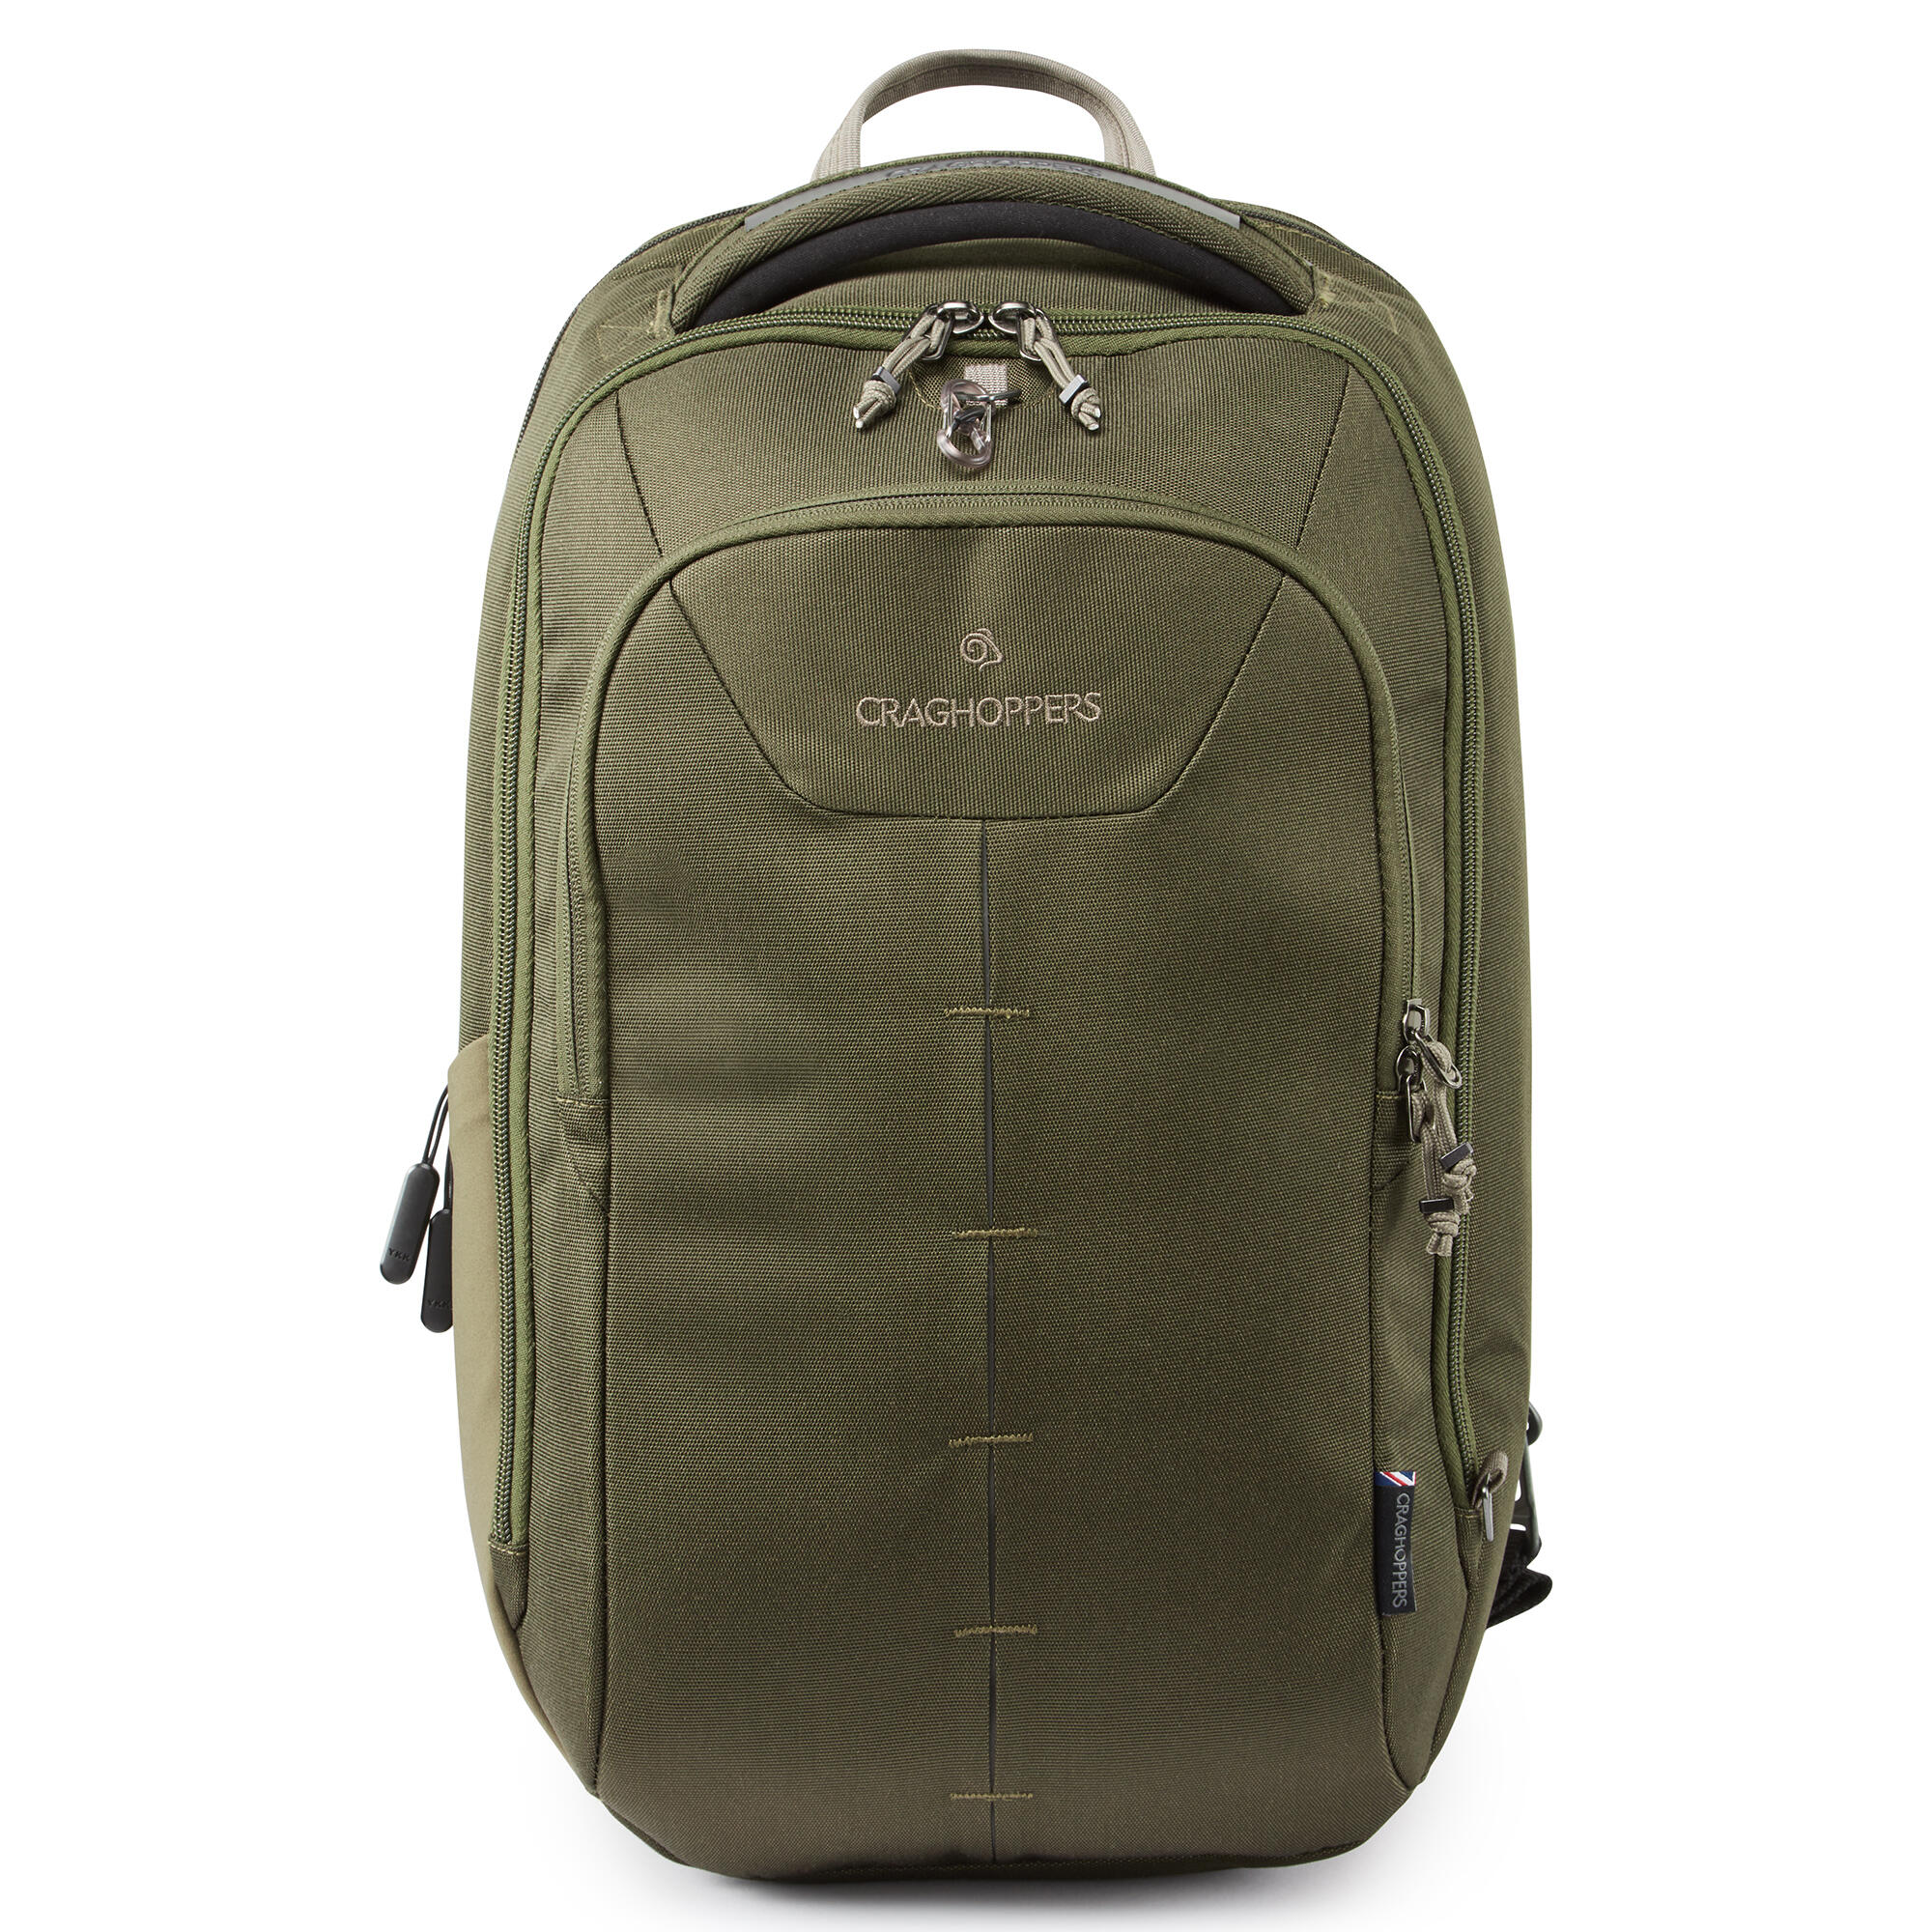 CRAGHOPPERS Anti-Theft Backpack 30L